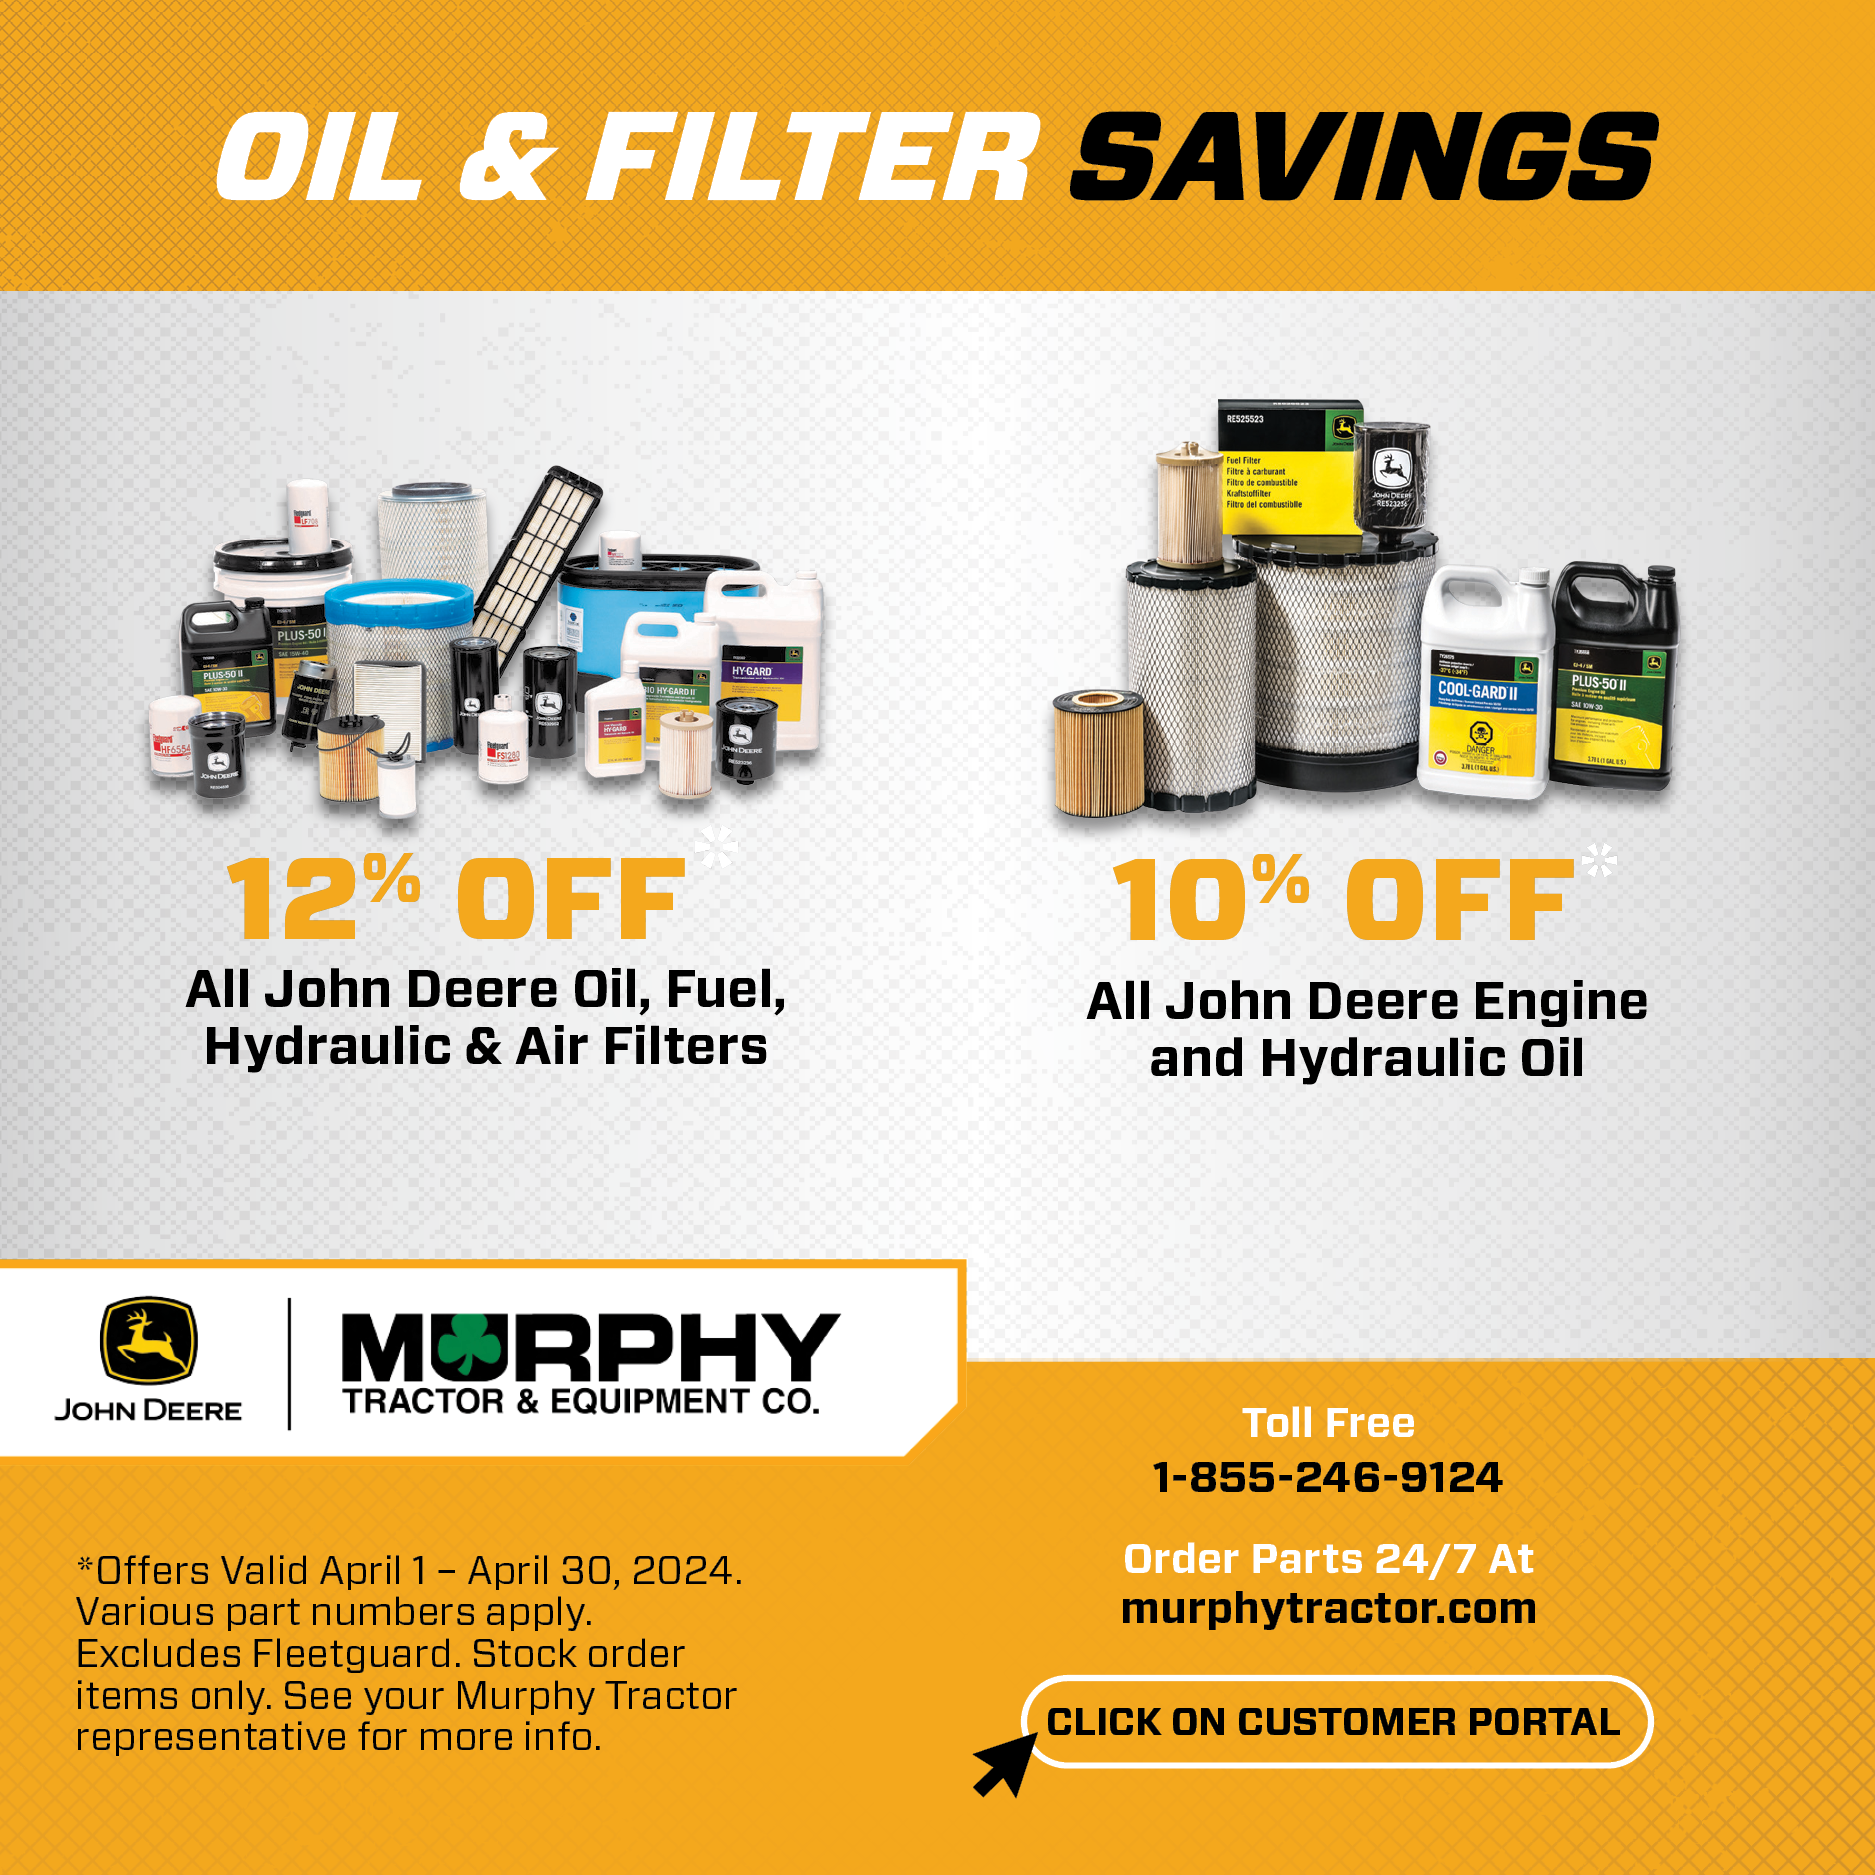 Oil and Filter Savings